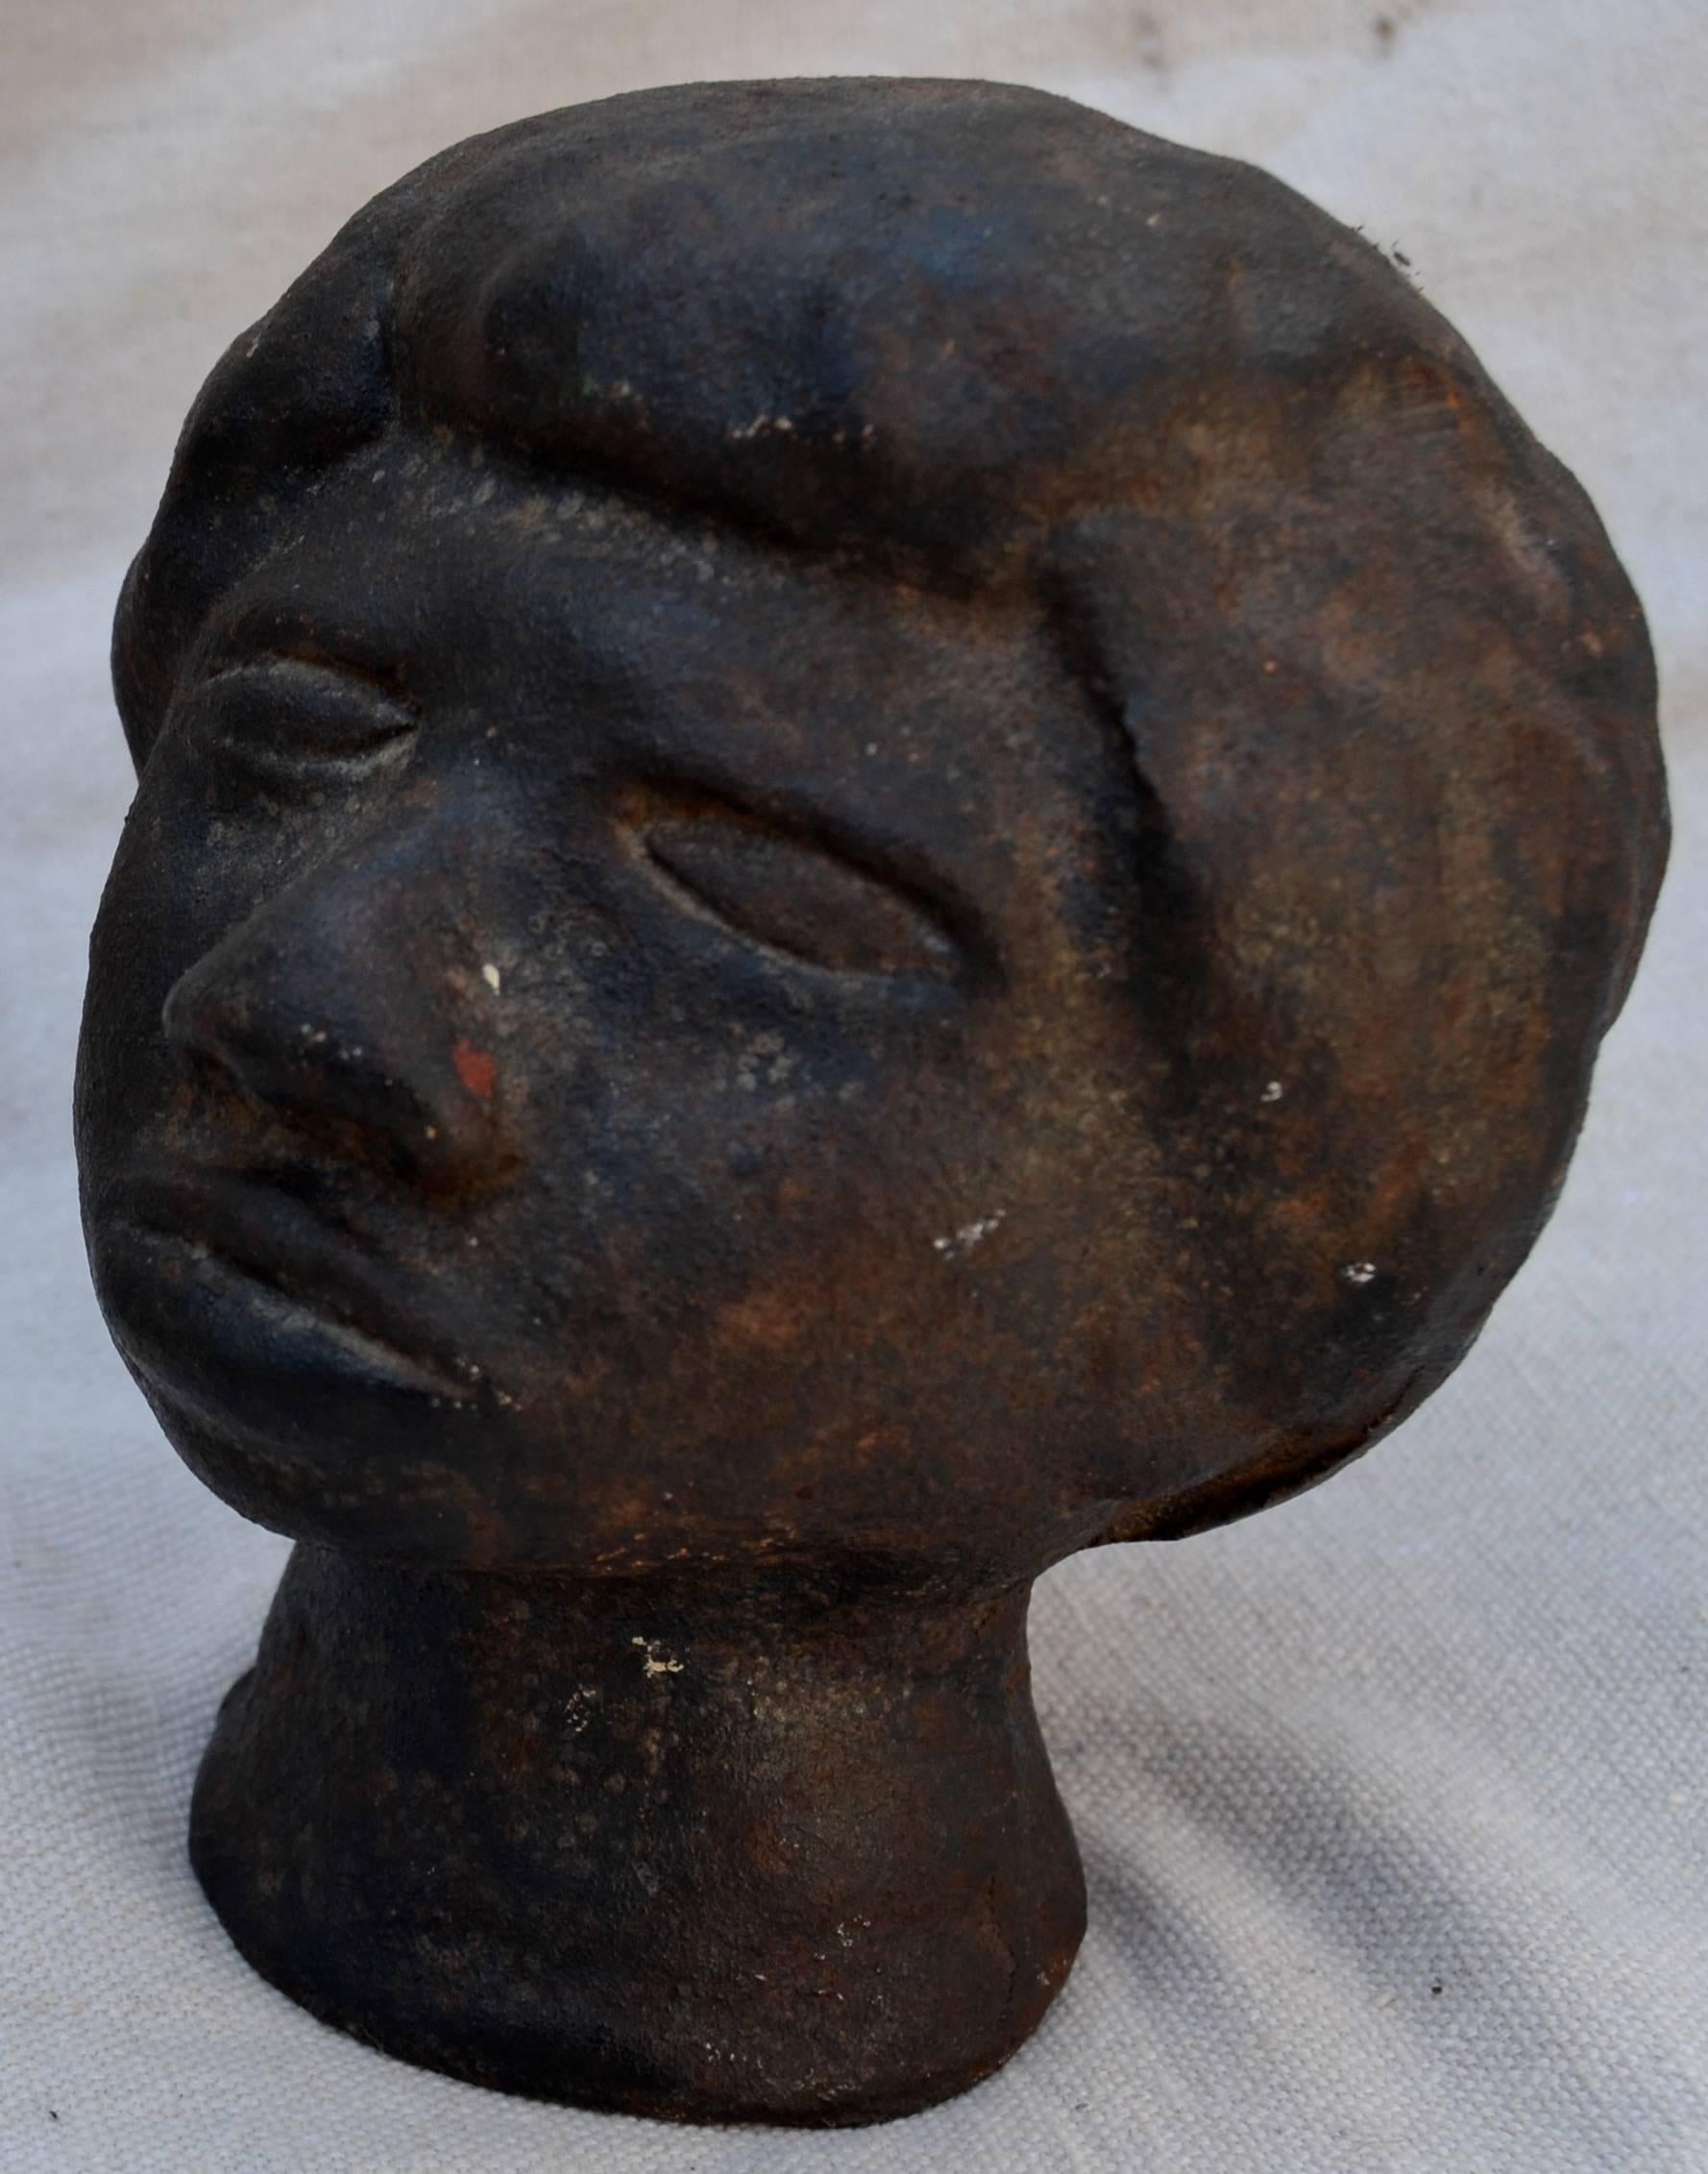 Rare 19th century cast iron portrait bust deftly rendered in the round. An unusual vernacular use of cast iron. Measures: Weight 12 lbs. excellent untouched surface.